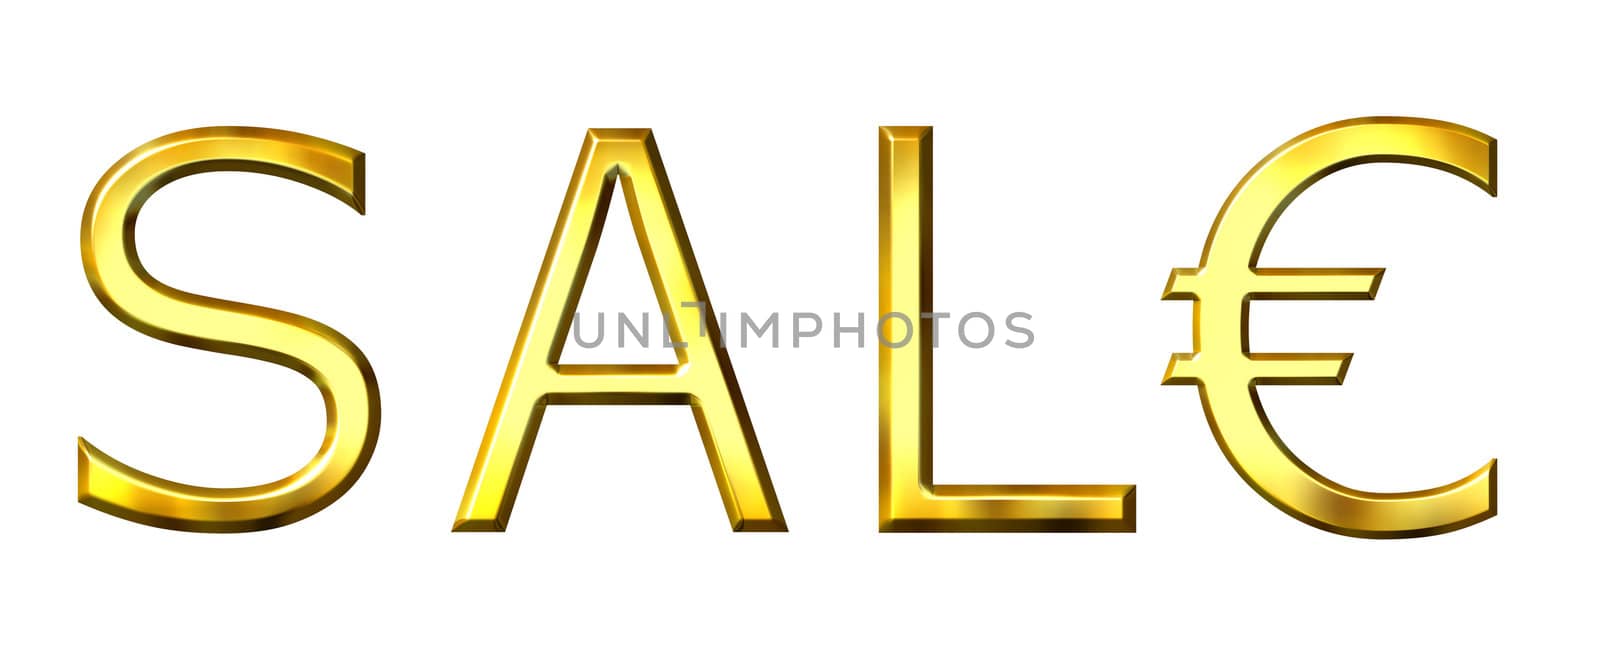 3d golden euro sale concept isolated in white